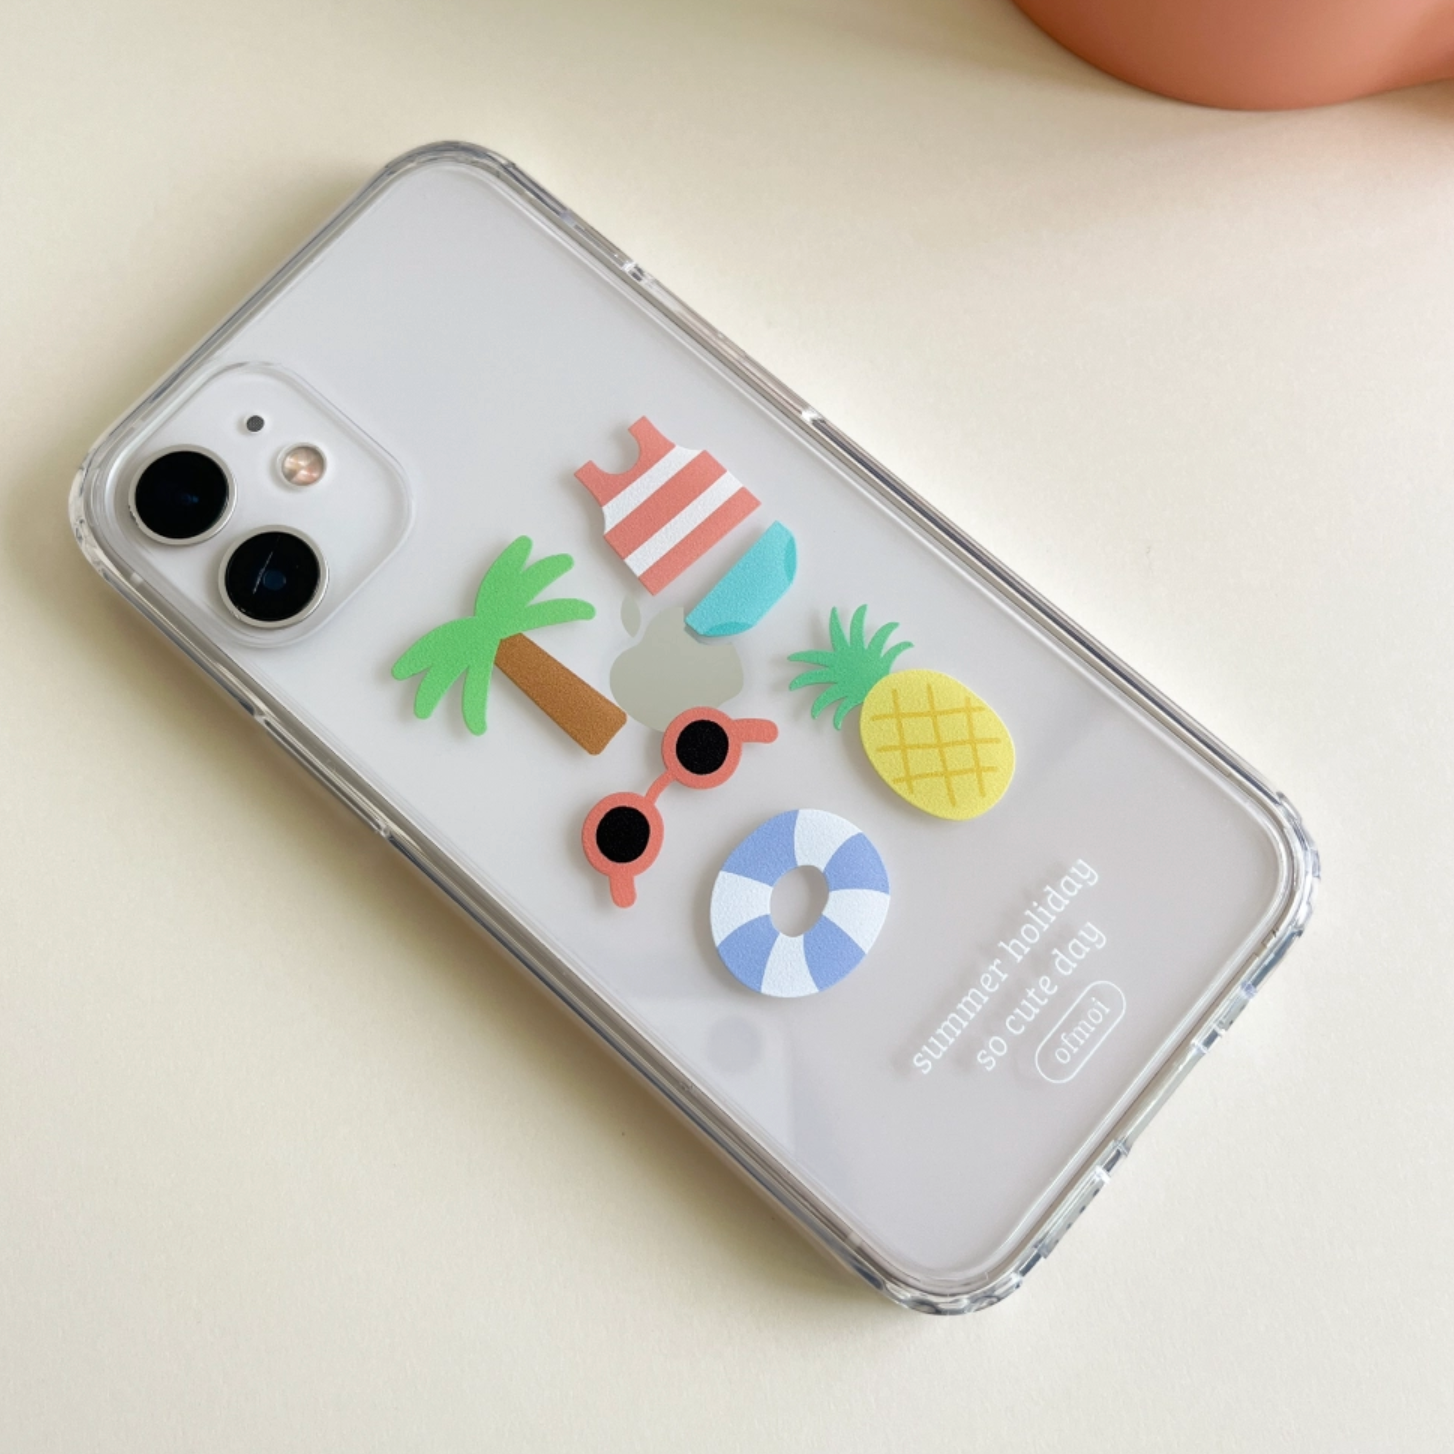 [ofmoi] So Cute Day Jelly Phone Case